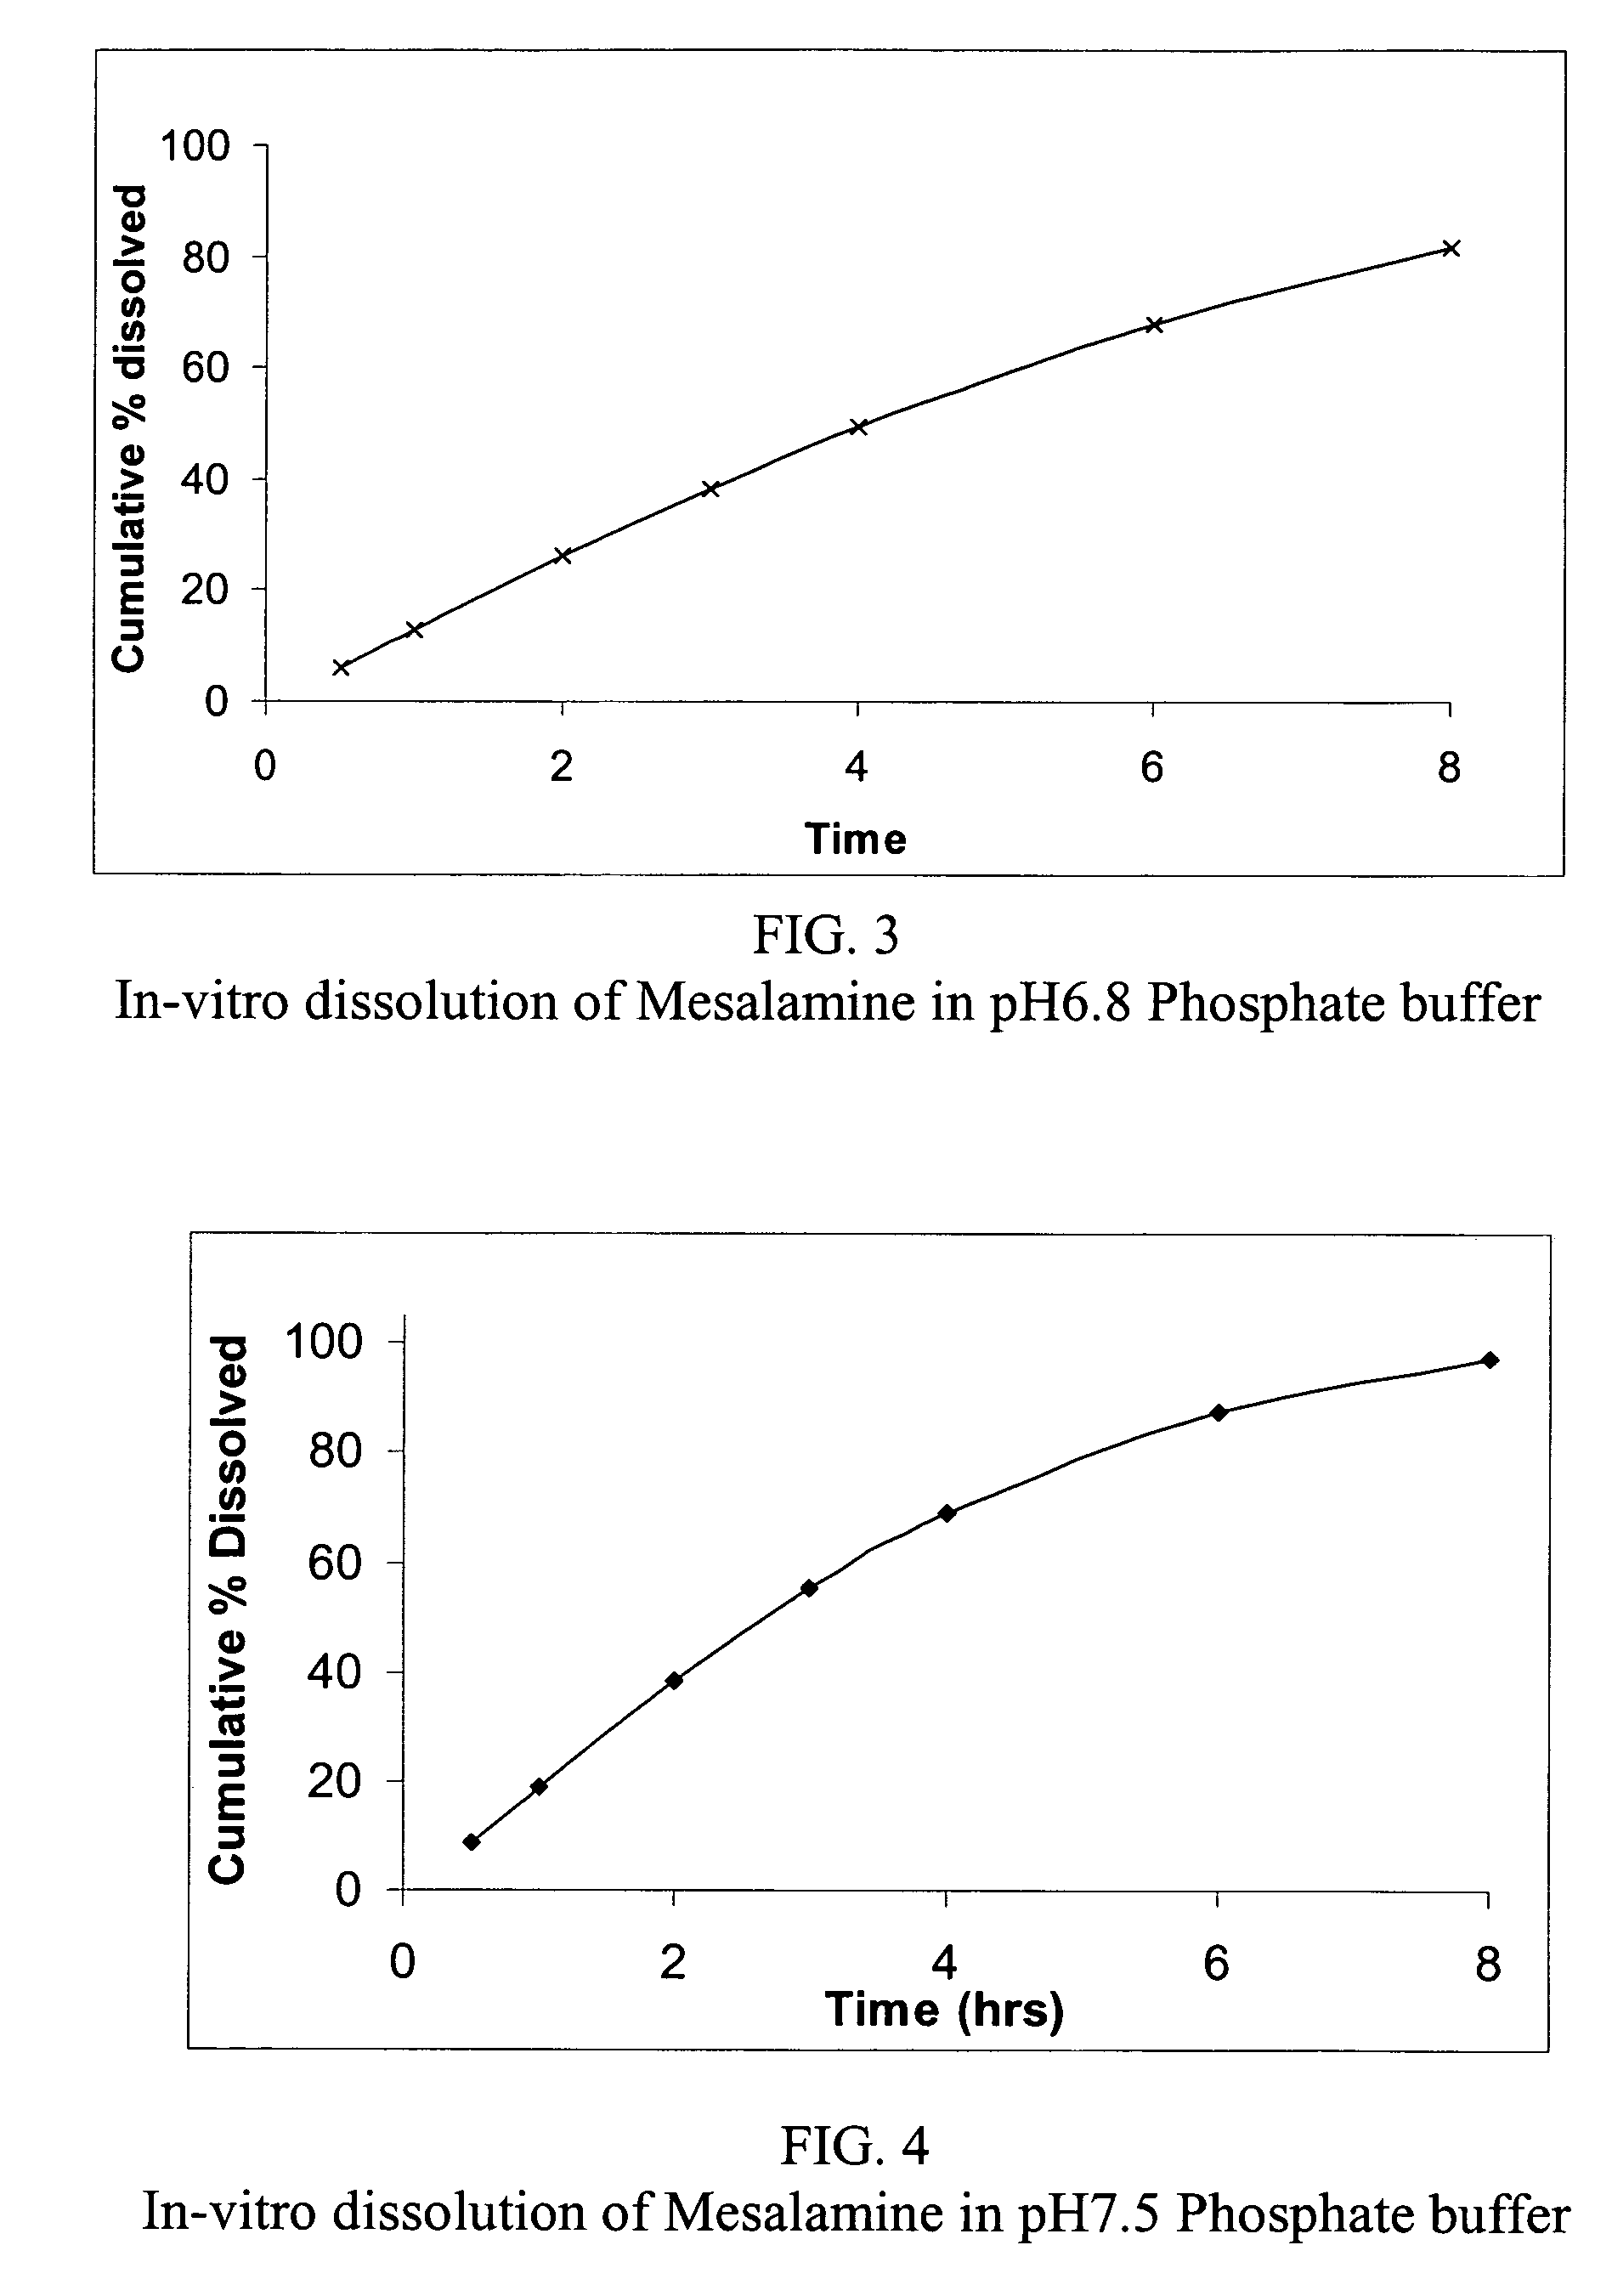 Modified release formulations of anti-irritability drugs